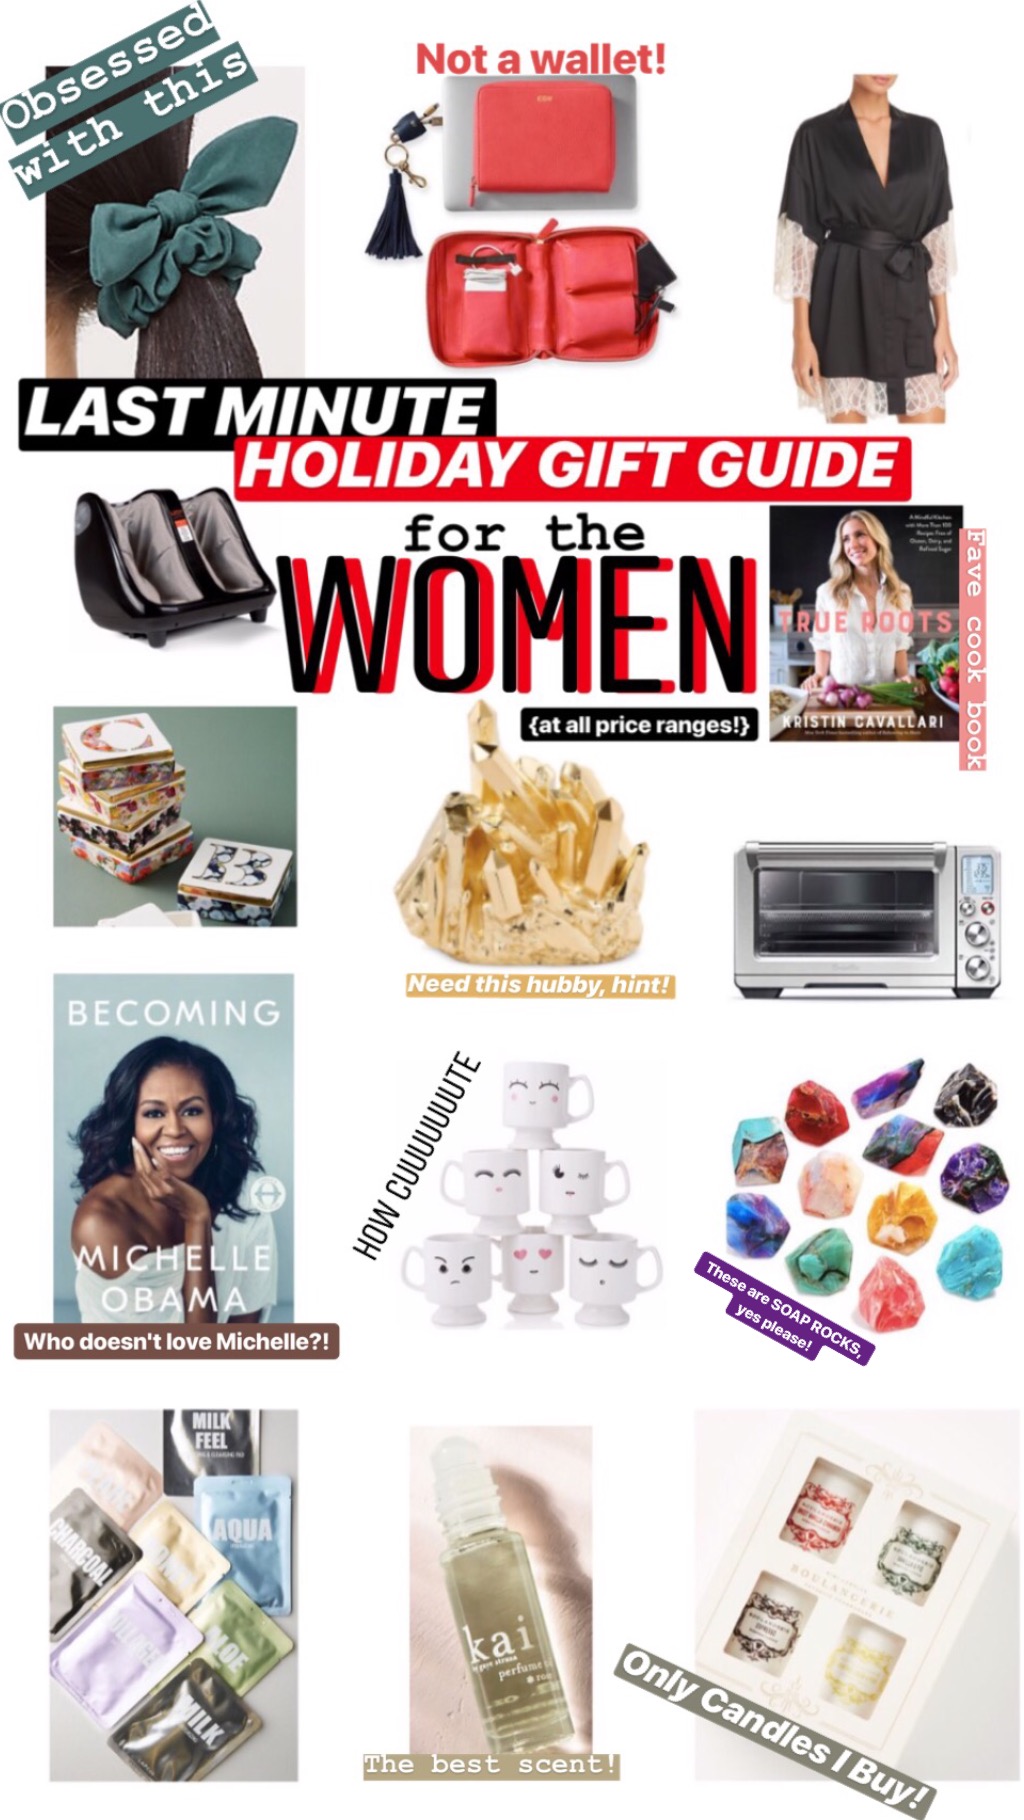 Last Minute Holiday Gift Guide for Women At All Price Points! :: I Adore What I Love Blog :: www.iadorewhatilove.com #iadorewhatilove